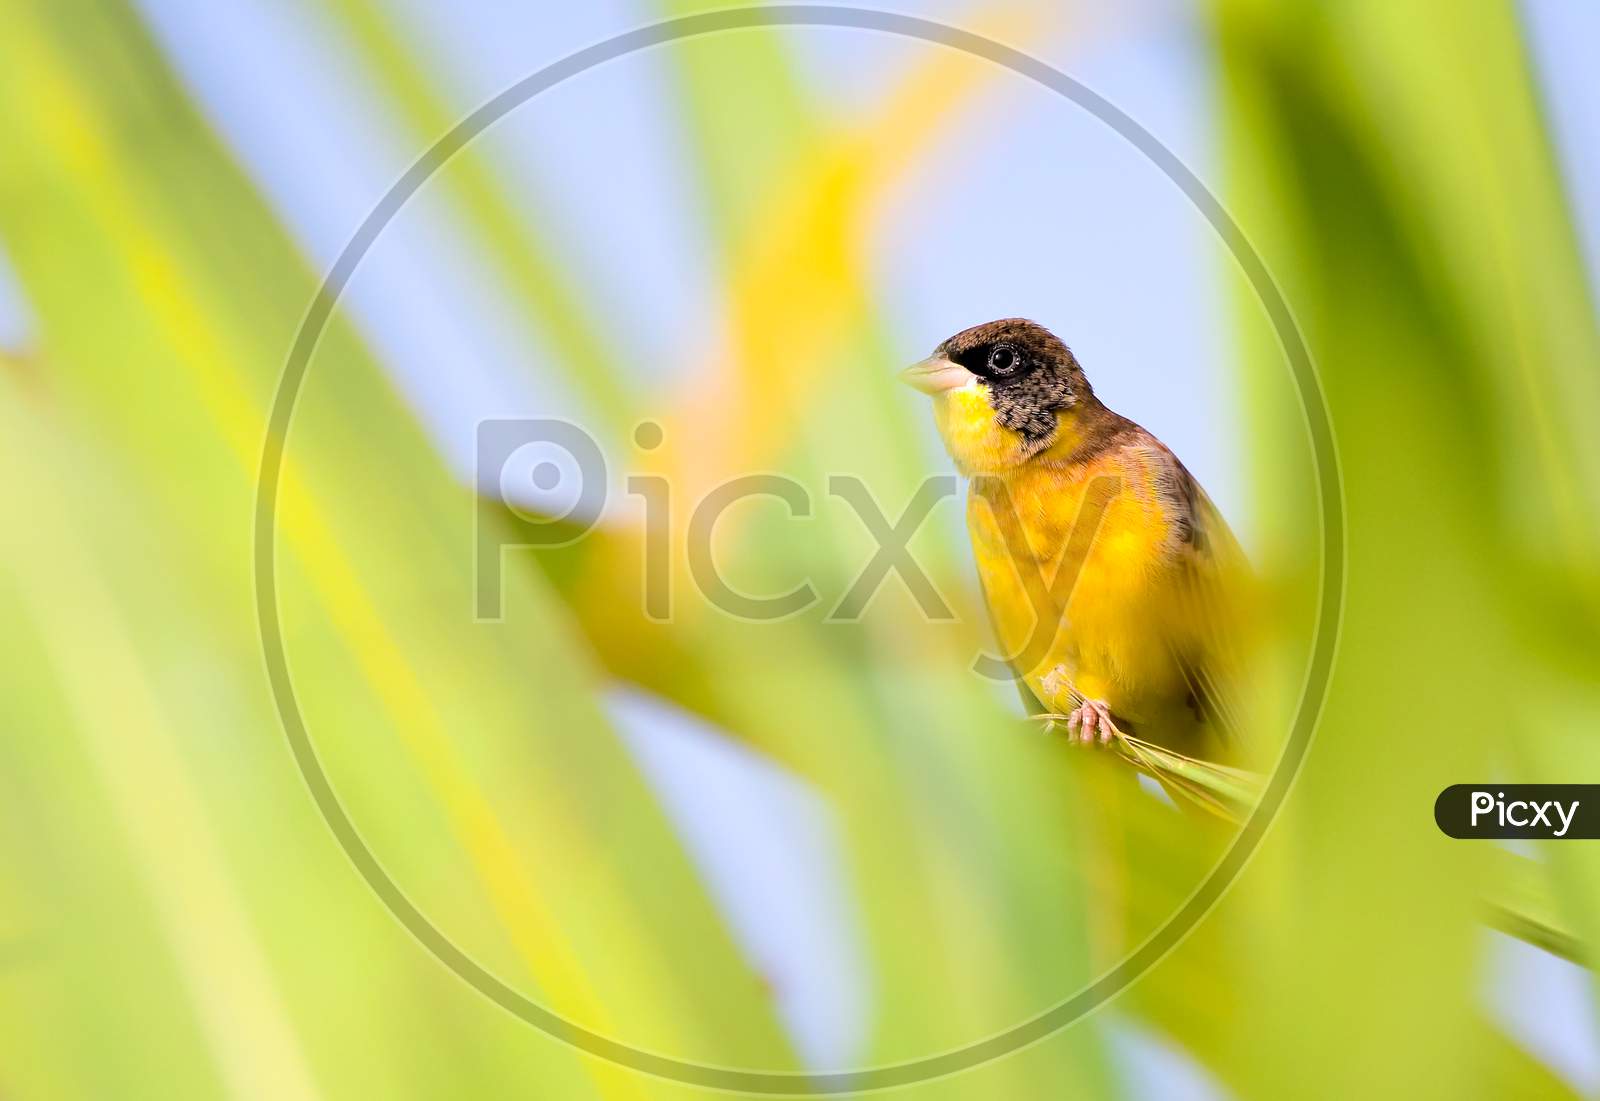 Black-Headed Bunting Sitting And Hiding Behind Plant Leaf